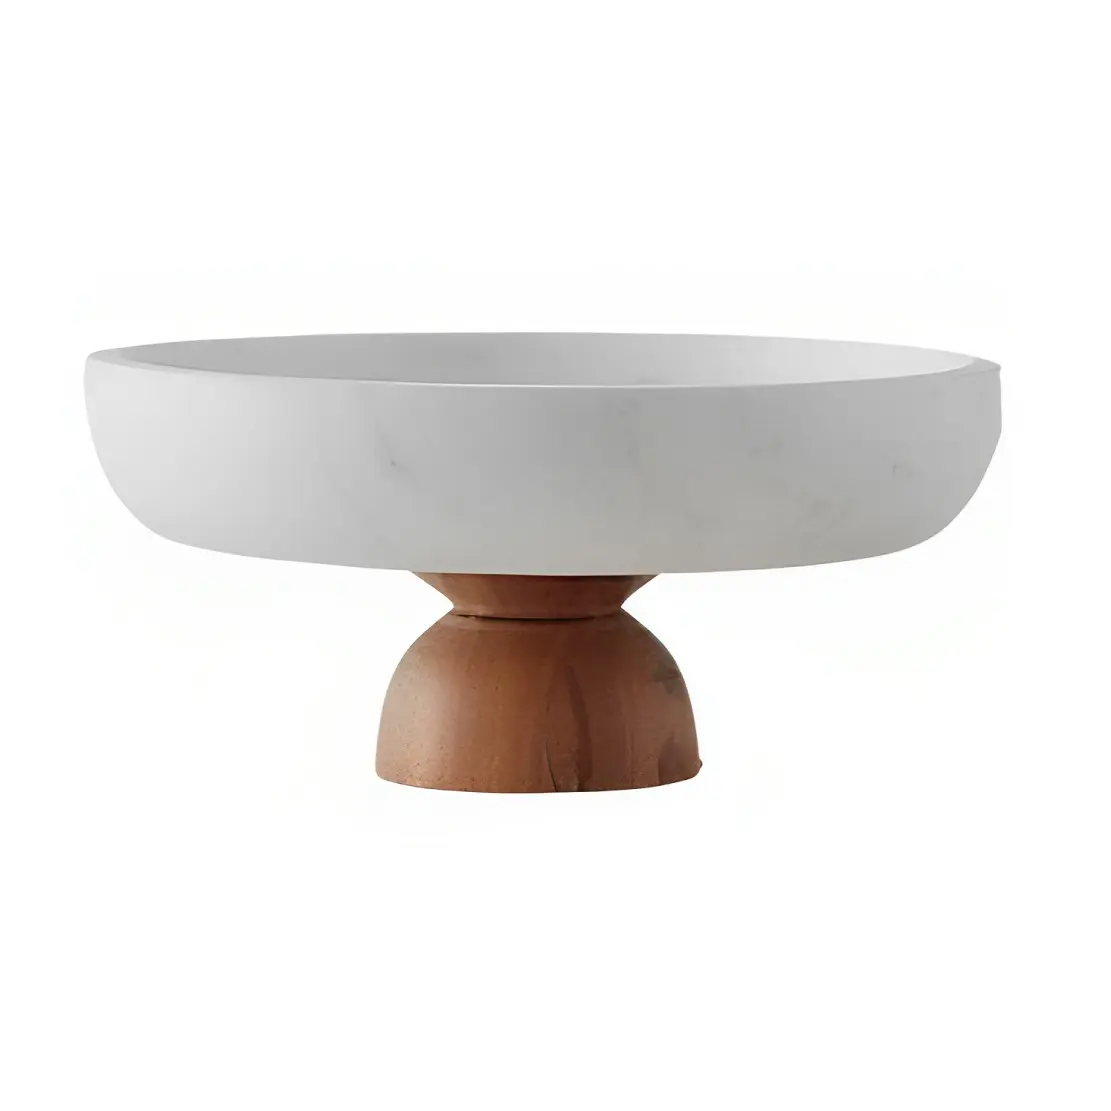 Wooden Base Cake Stand With Marble Top Pleasant Design Tabletop Decorative Serving Ware For Parties And Wedding